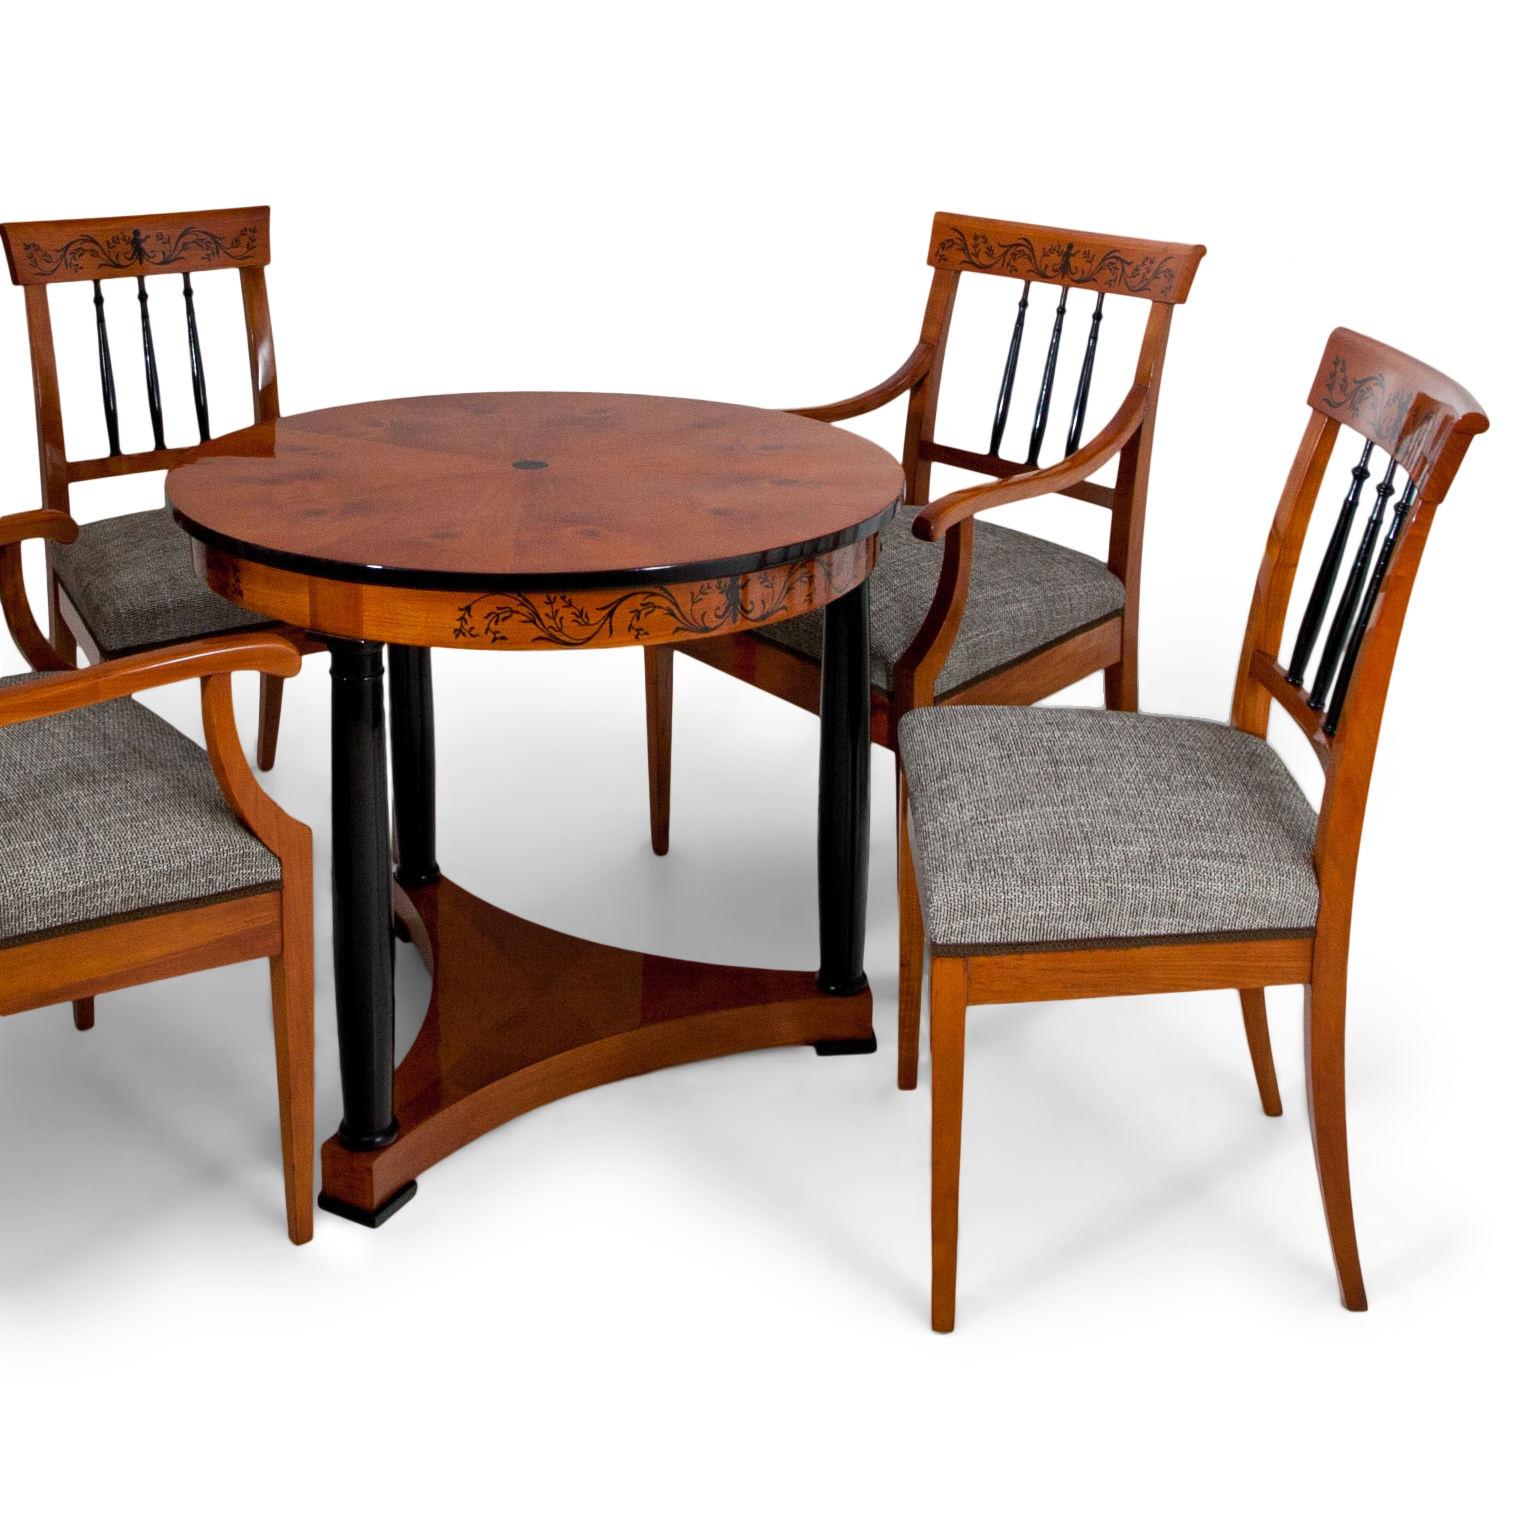 Sitting group, consisting of one table, two armchairs and two chairs out of cherry wood. The round table stands on a trefoil base and ebonized columns support the top. The edge is ebonized as well and the rail shows floral designs that are repeated